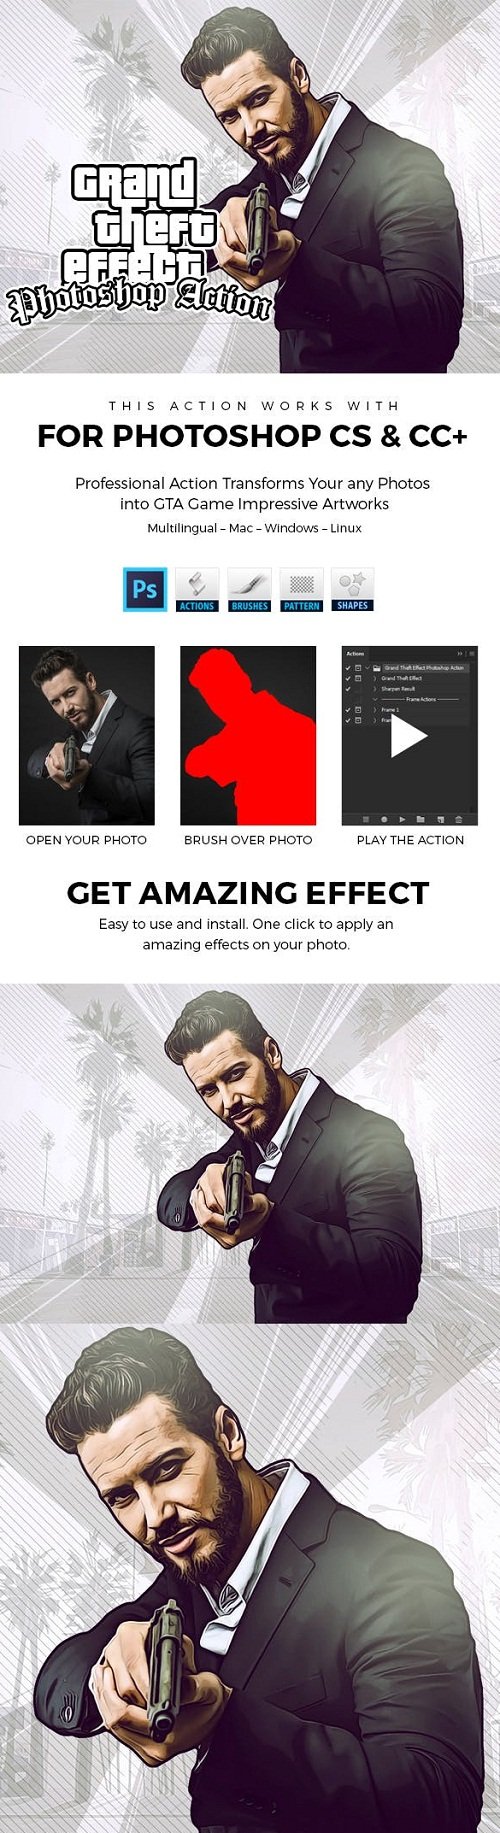 Grand Theft Effect Photoshop Action